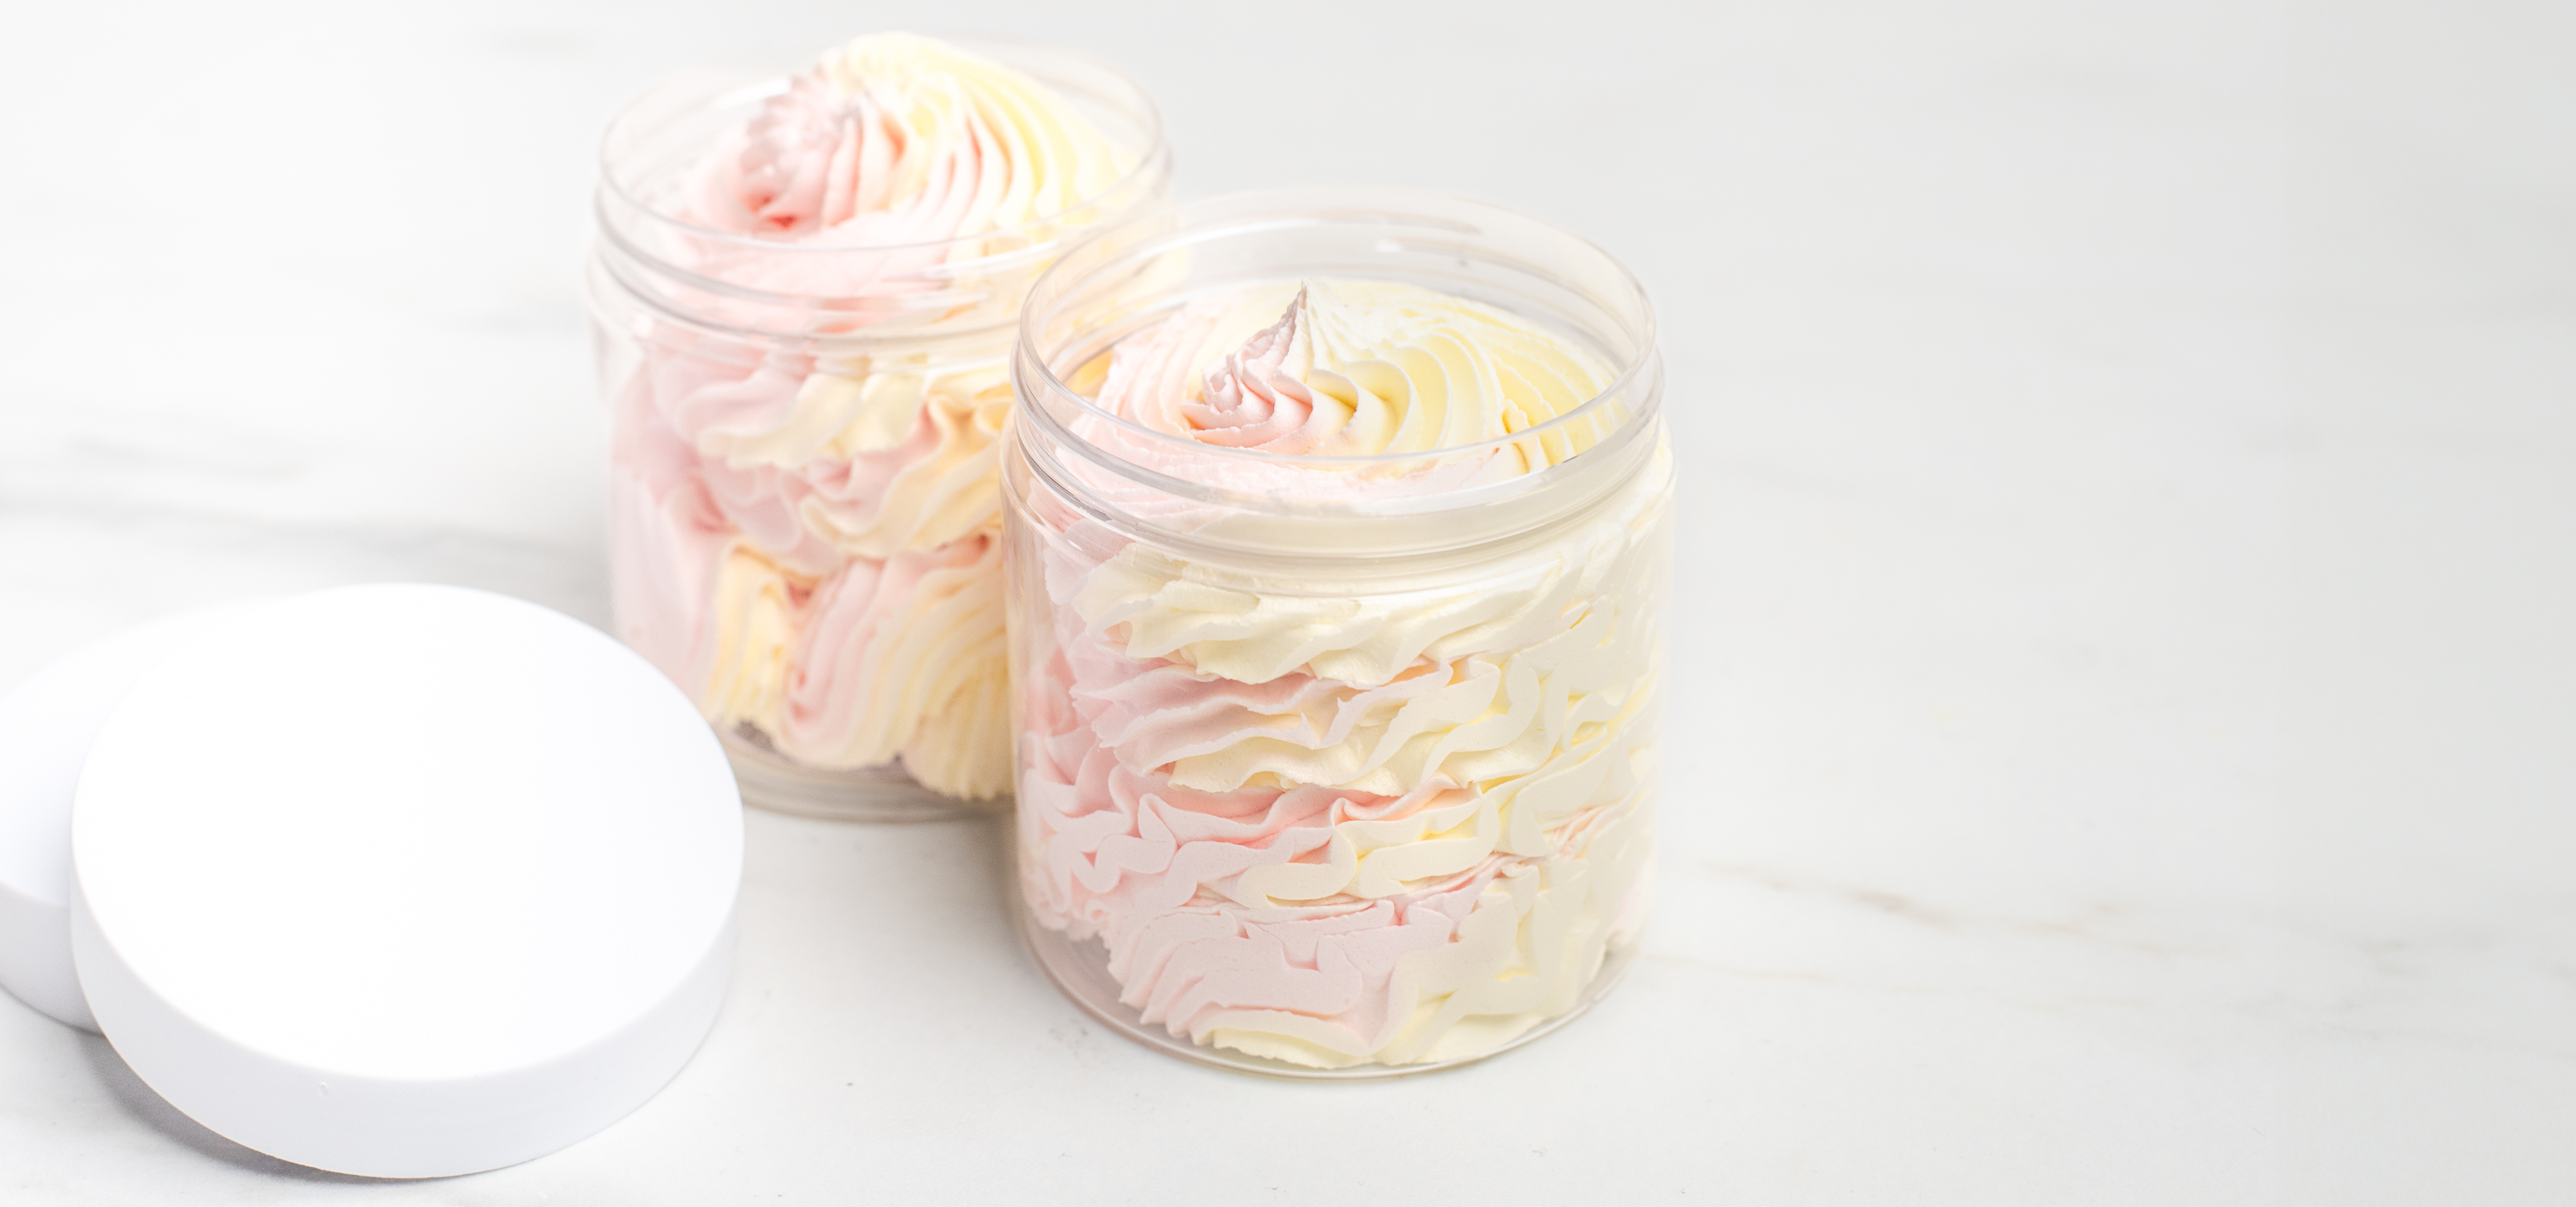 How to make mica swirl whipped soap